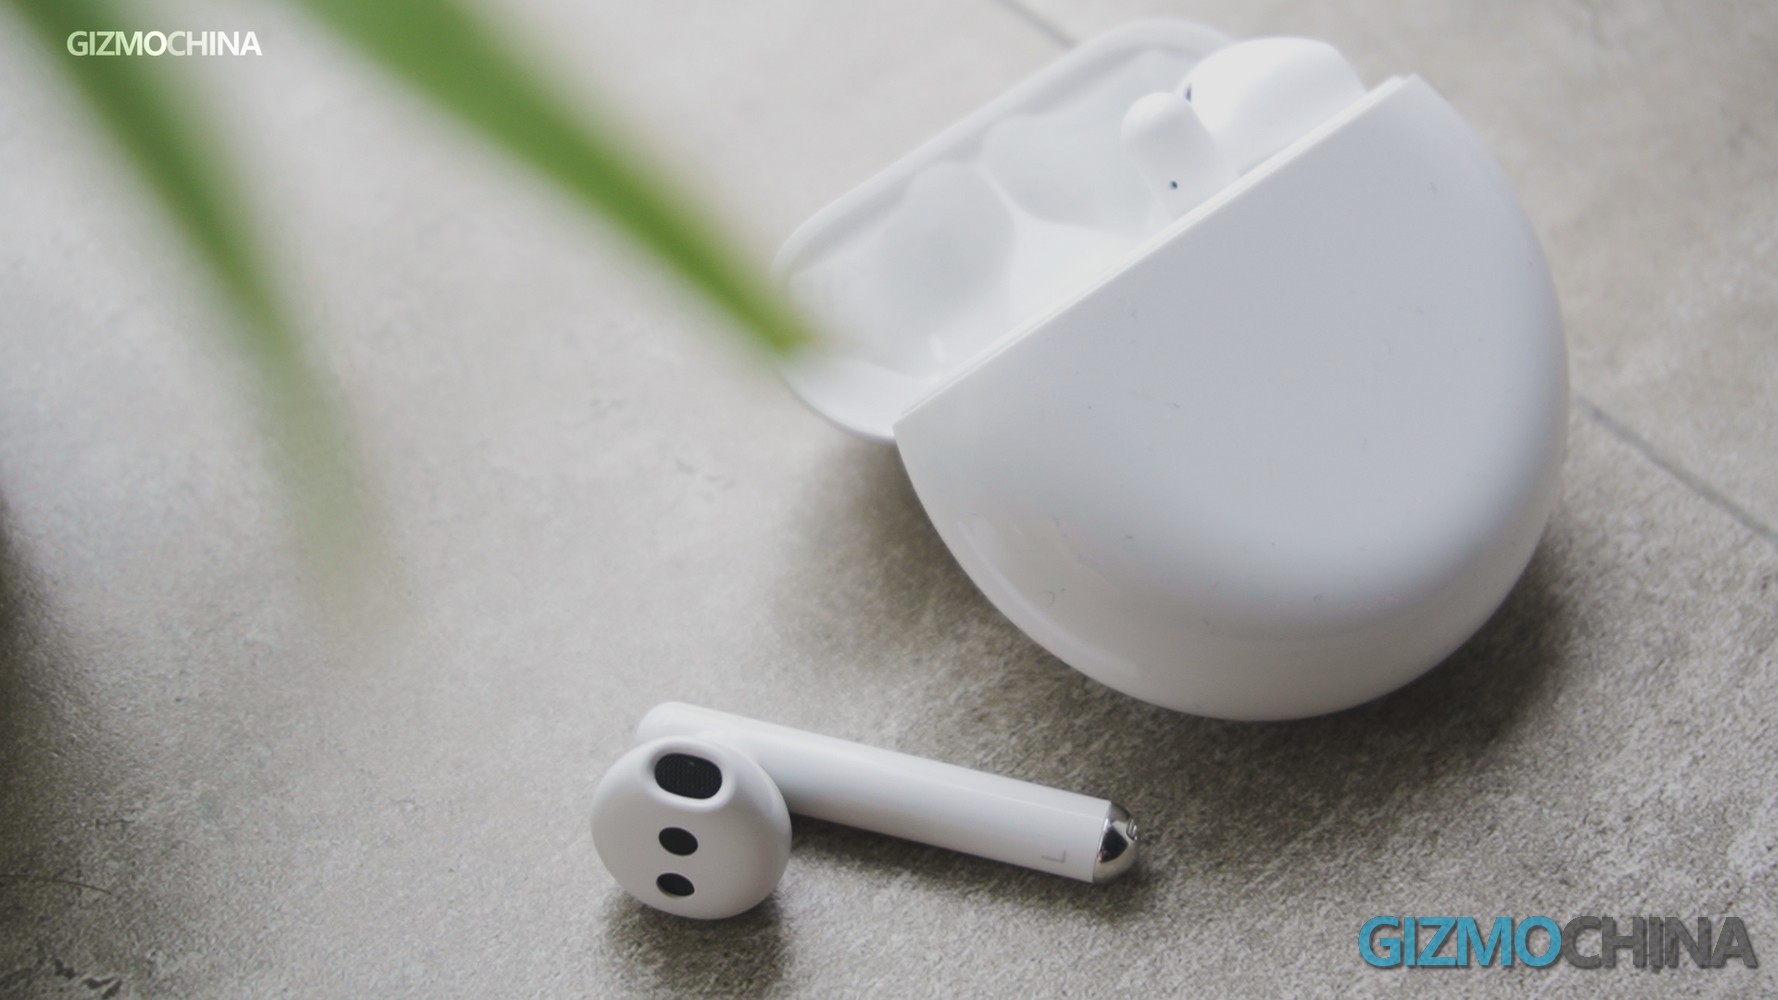 Huawei FreeBuds 3 review: AirPods for Android